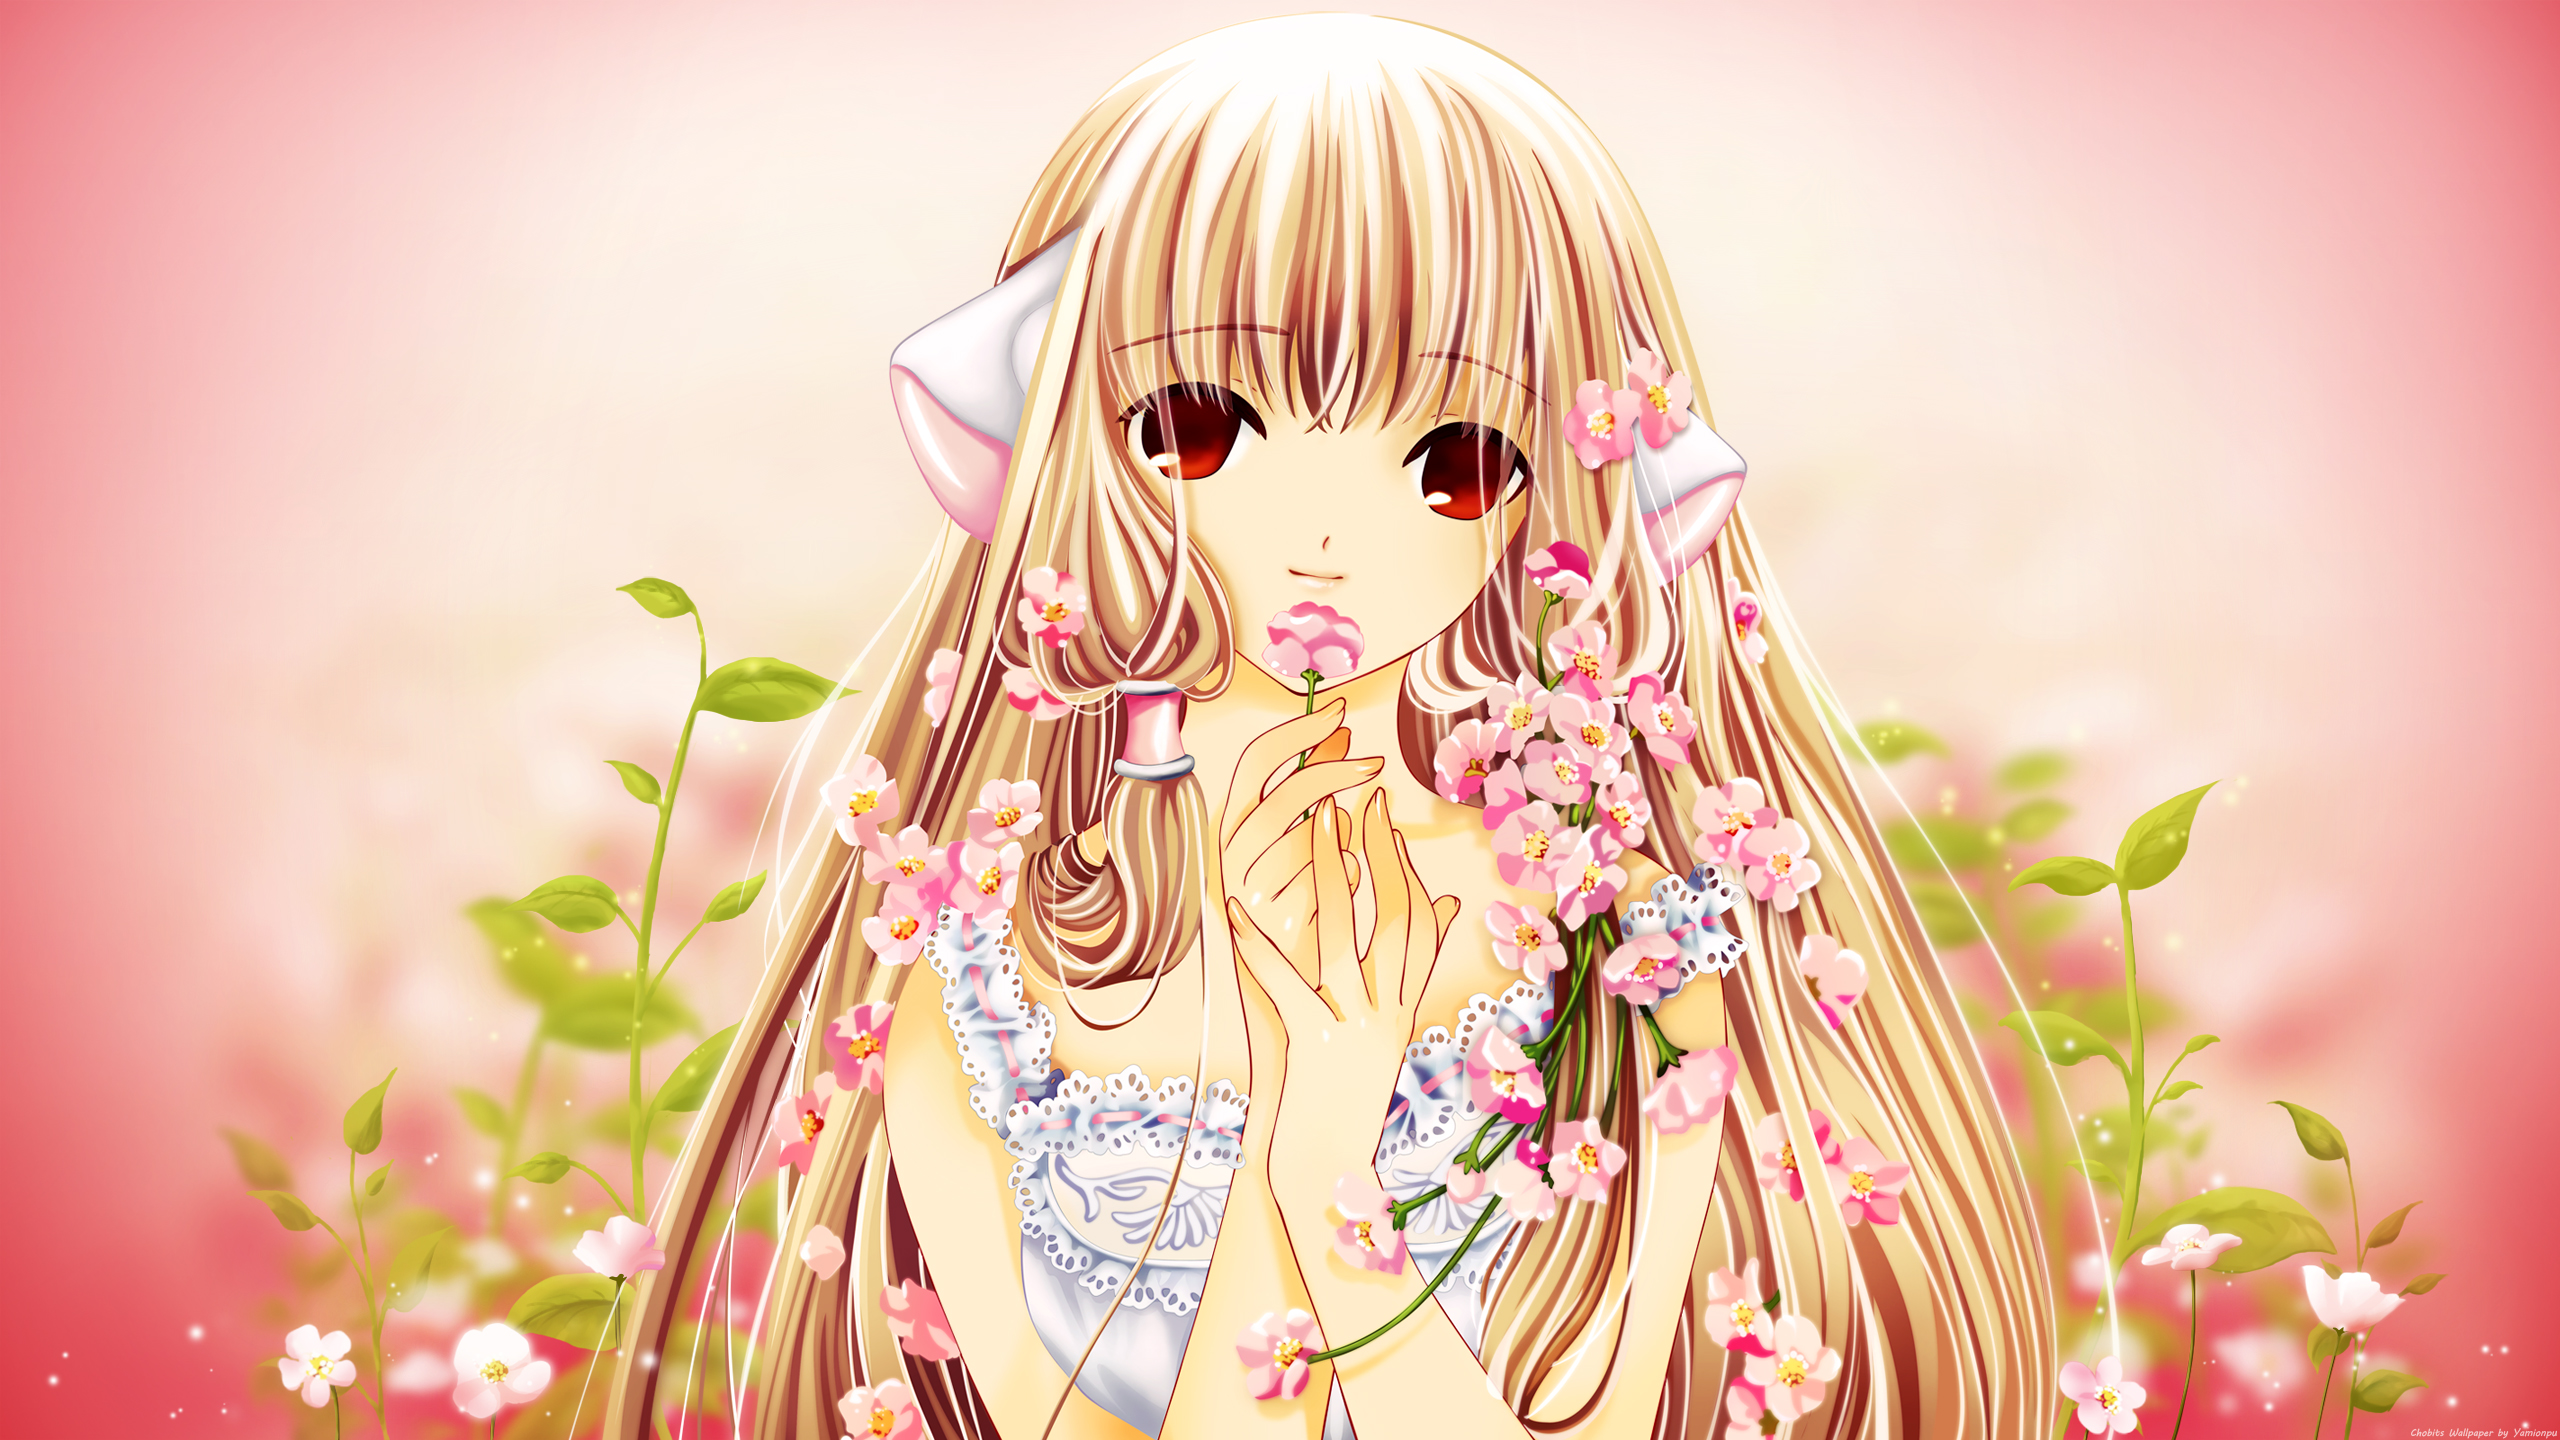 Images of Chobits | 2560x1440